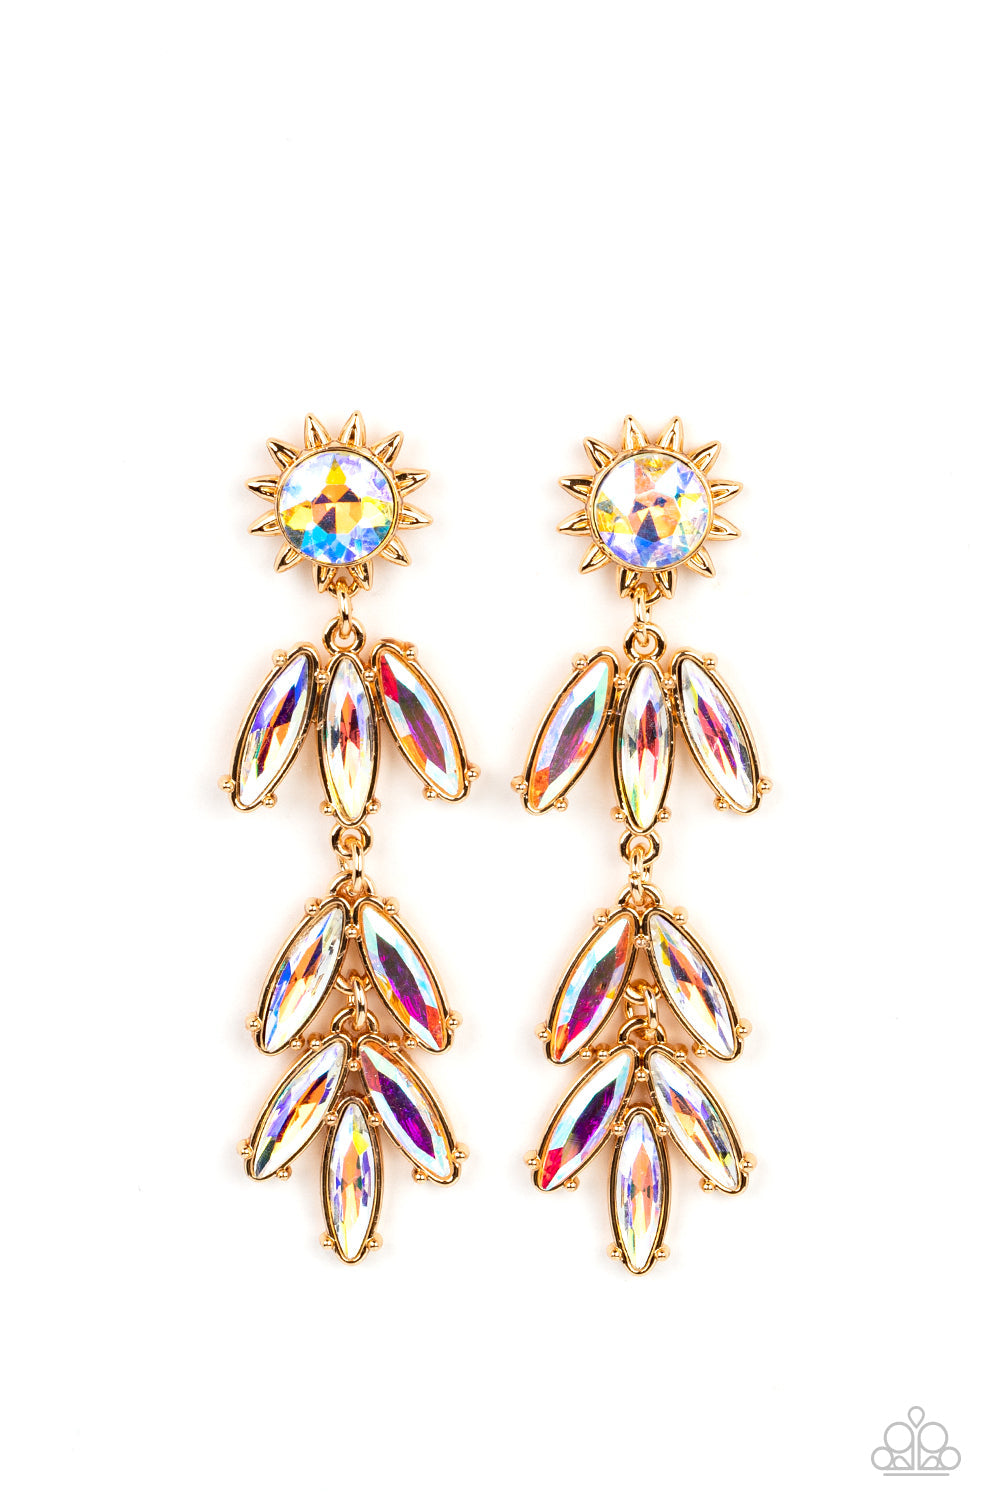 Space Age Sparkle - Gold Iridescent Earrings - Paparazzi Accessories - A gold sunburst frame wraps around an iridescent gem as it gives way to an explosion of marquise-cut rhinestones in the same dreamy finish. The oblong frames swing dramatically from the ear, capturing and reflecting light at every turn.